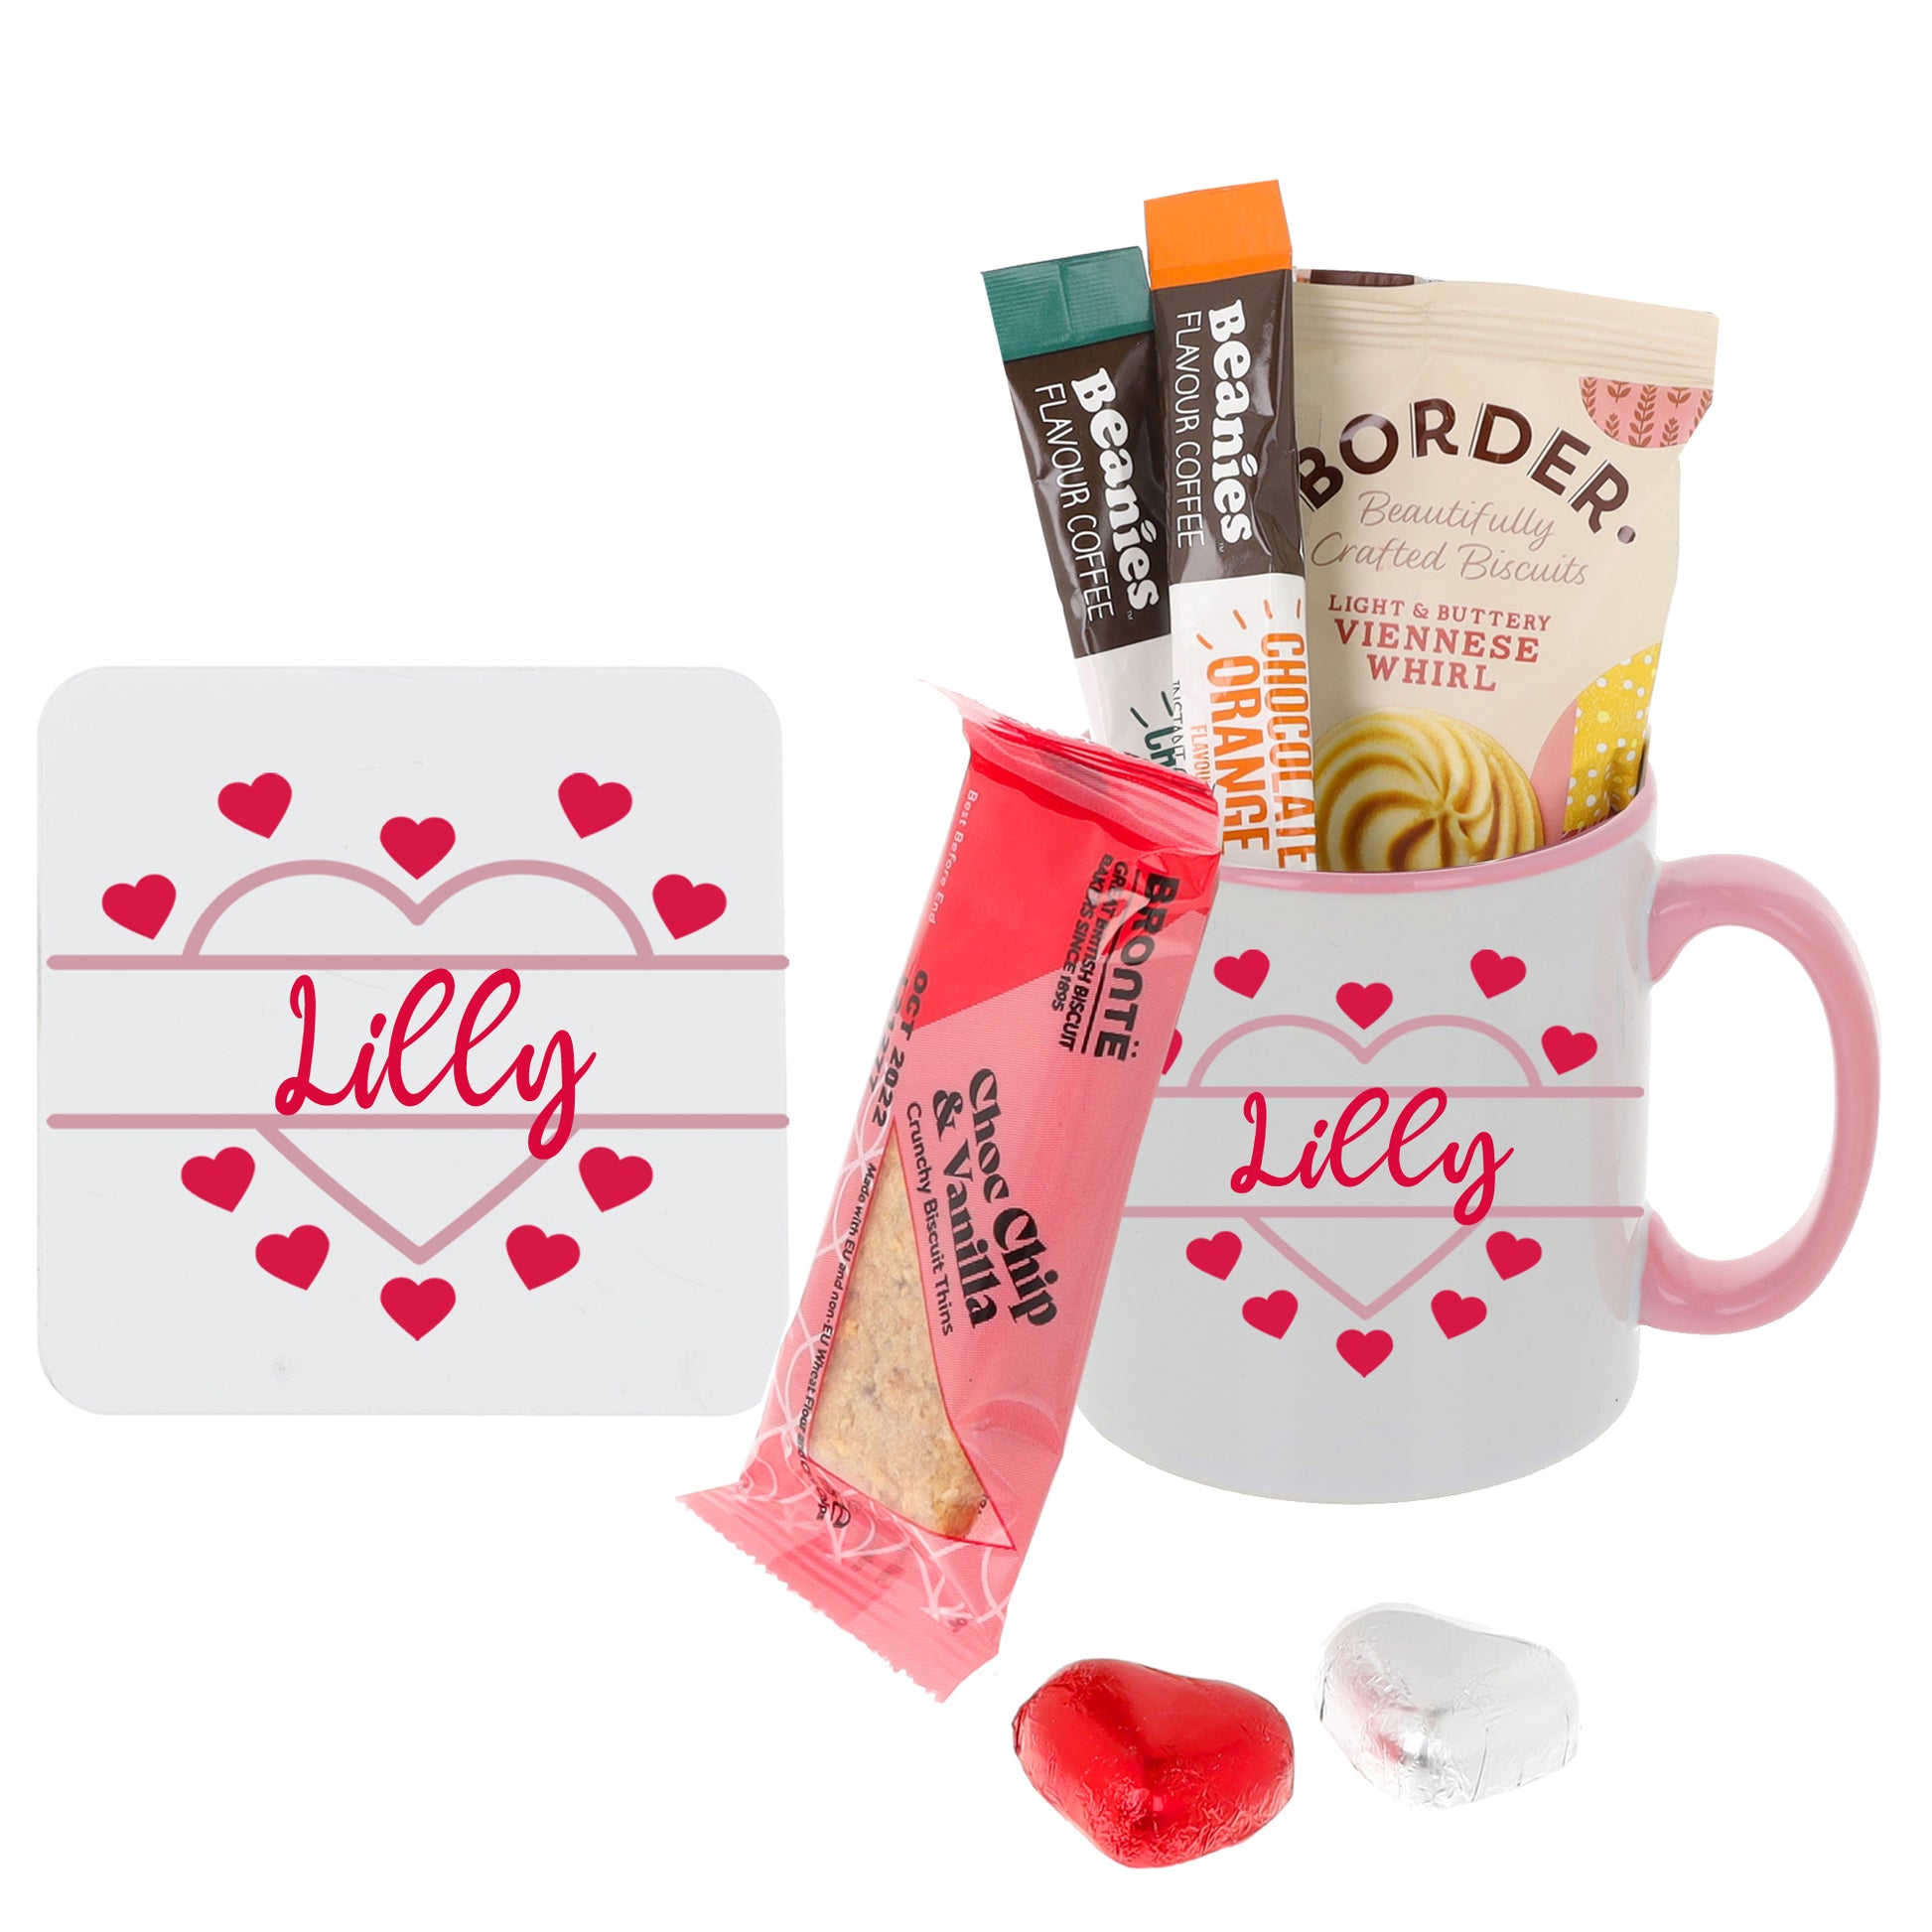 Personalised Pink Heart Design Mug and Coaster with Treats  - Always Looking Good - Coffee Filled Set  